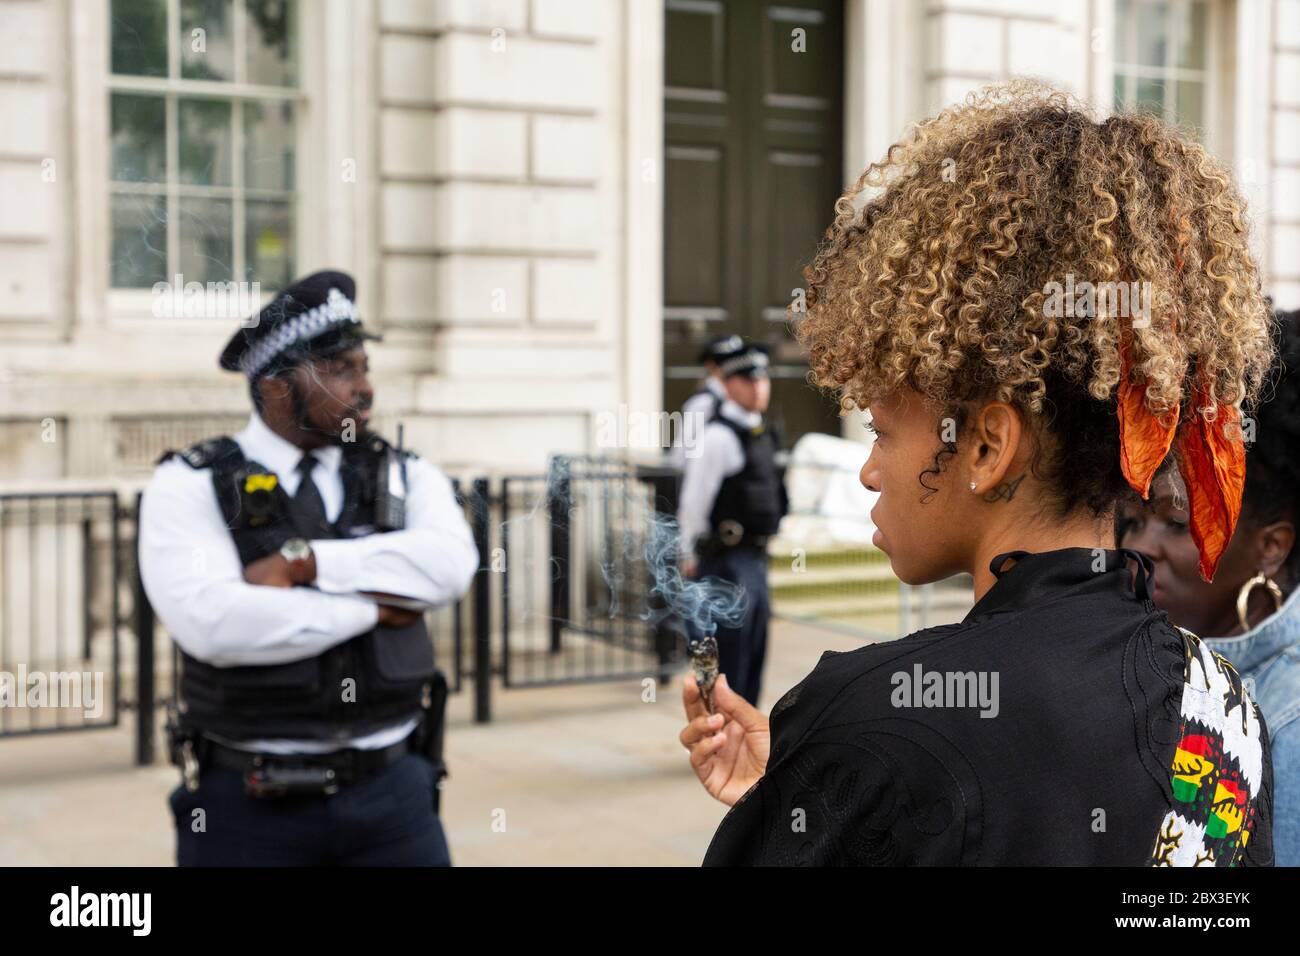 A young protester burns sage in front of a policeman during the Black Lives Matters protest outside 10 Downing Street, London, 3 June 2020 Stock Photo